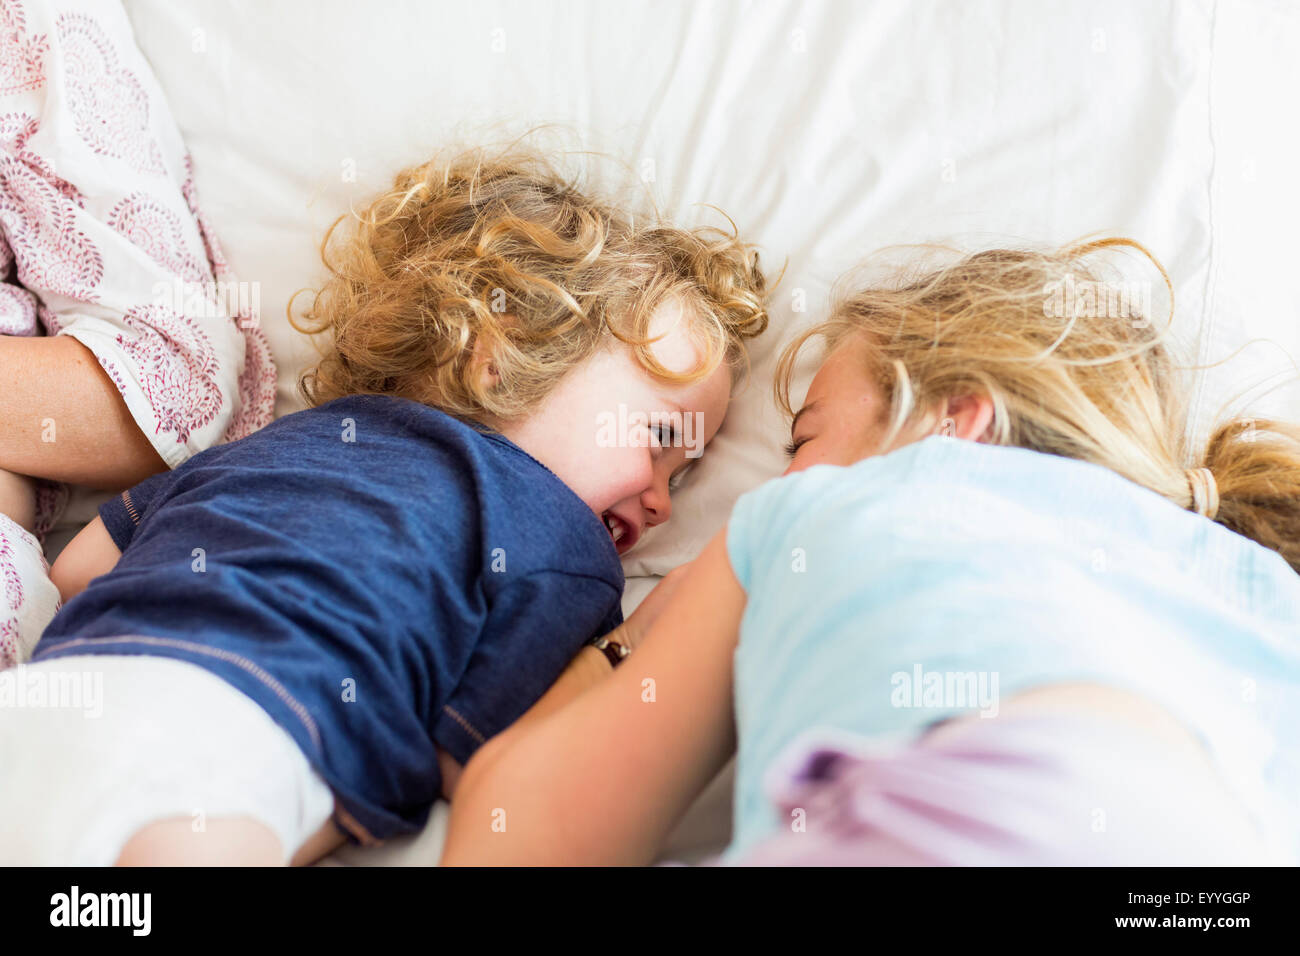 Caucasian brother and sister playing on bed Stock Photo